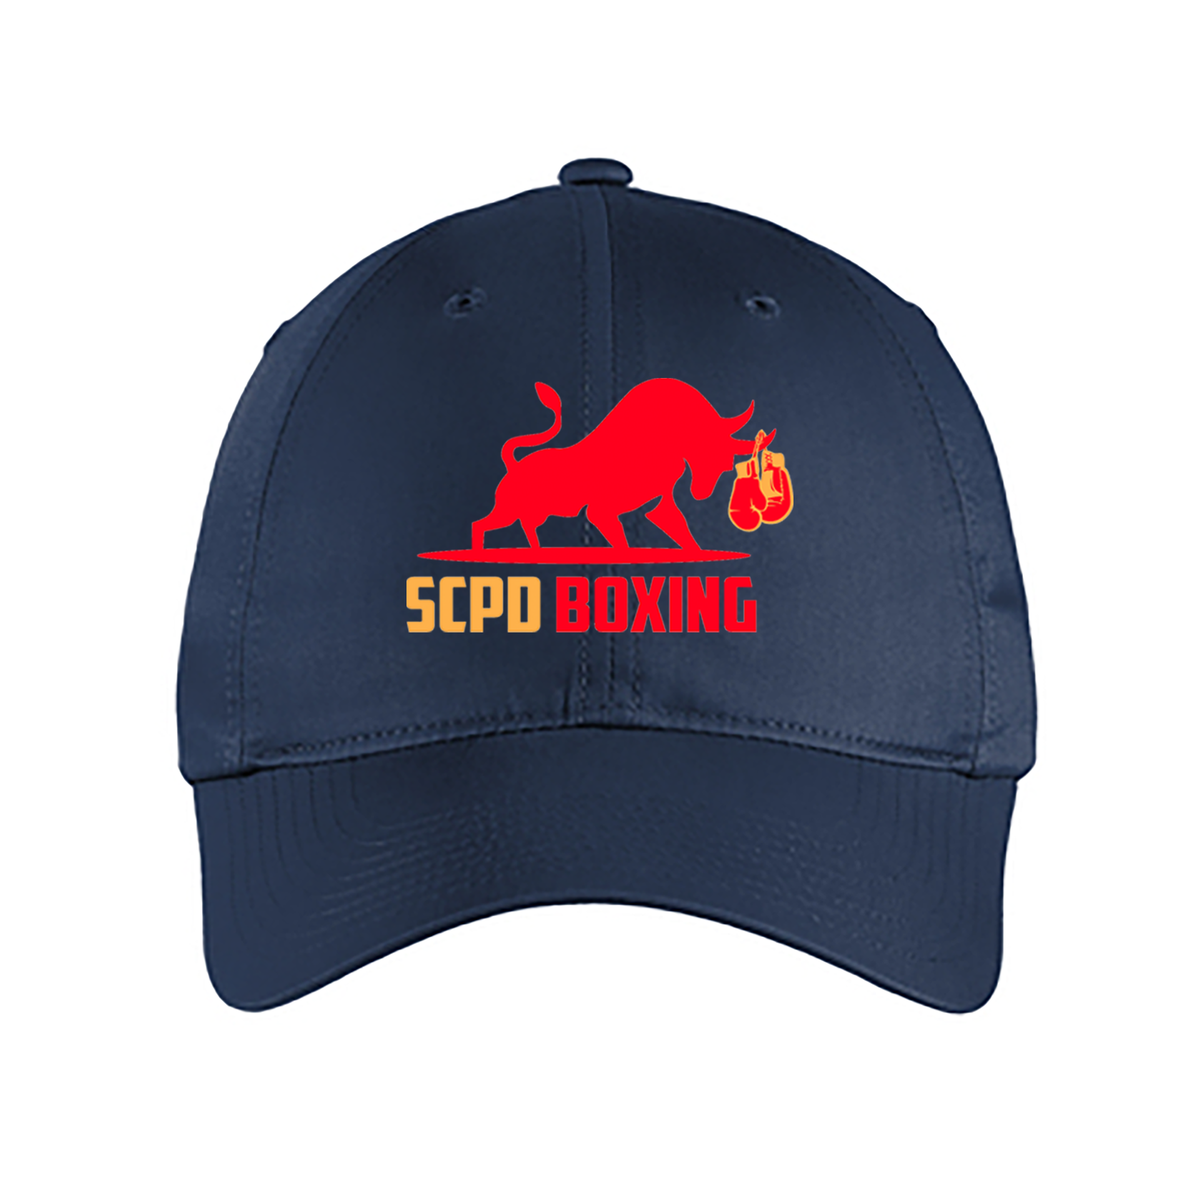 SCPD Boxing Nike Unstructured Twill Cap